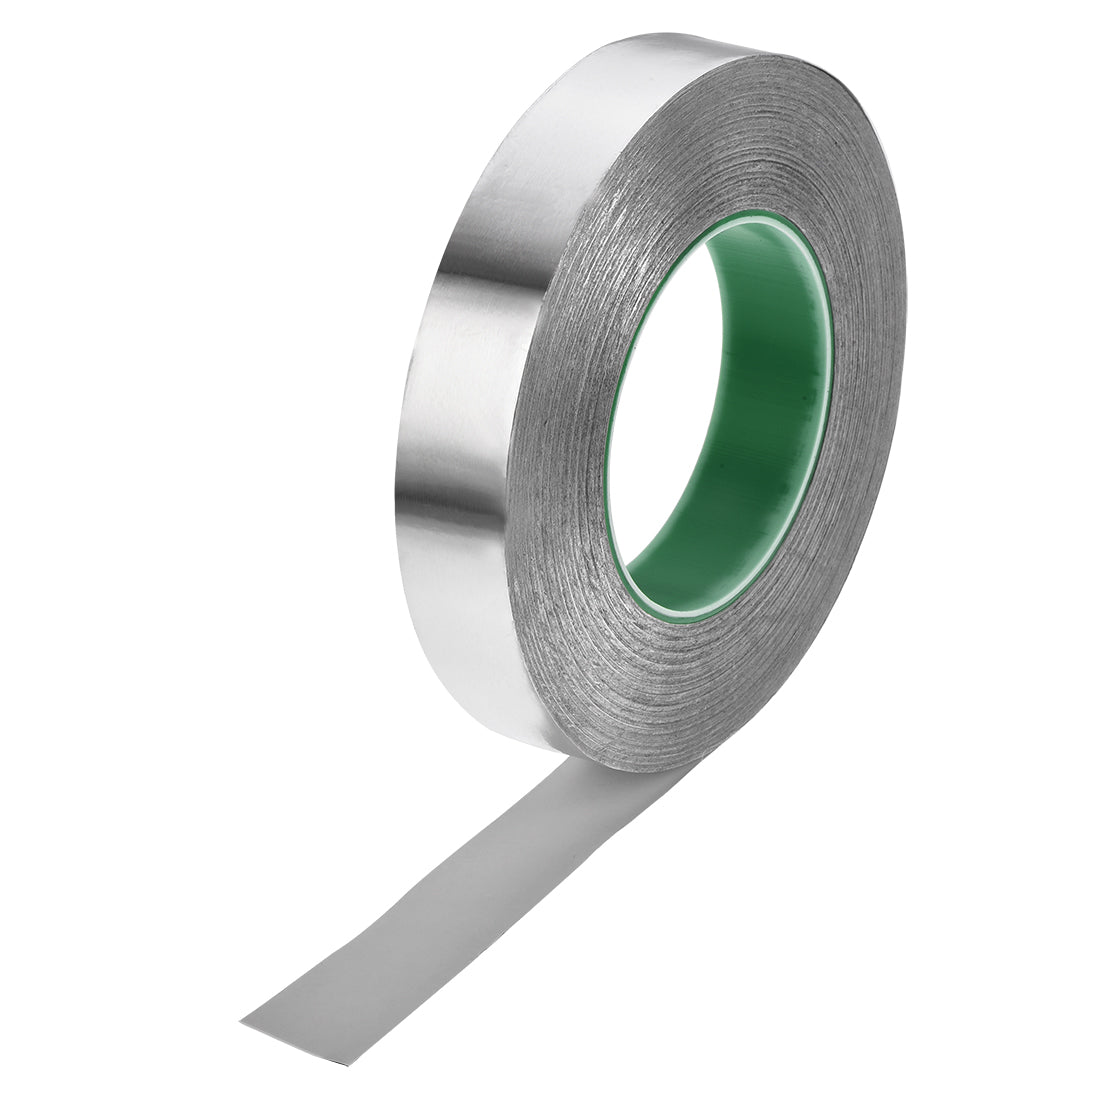 uxcell Uxcell 25mm Aluminum Foil Tape for HVAC,Patching Hot and Cold Air Ducts 50m/164ft